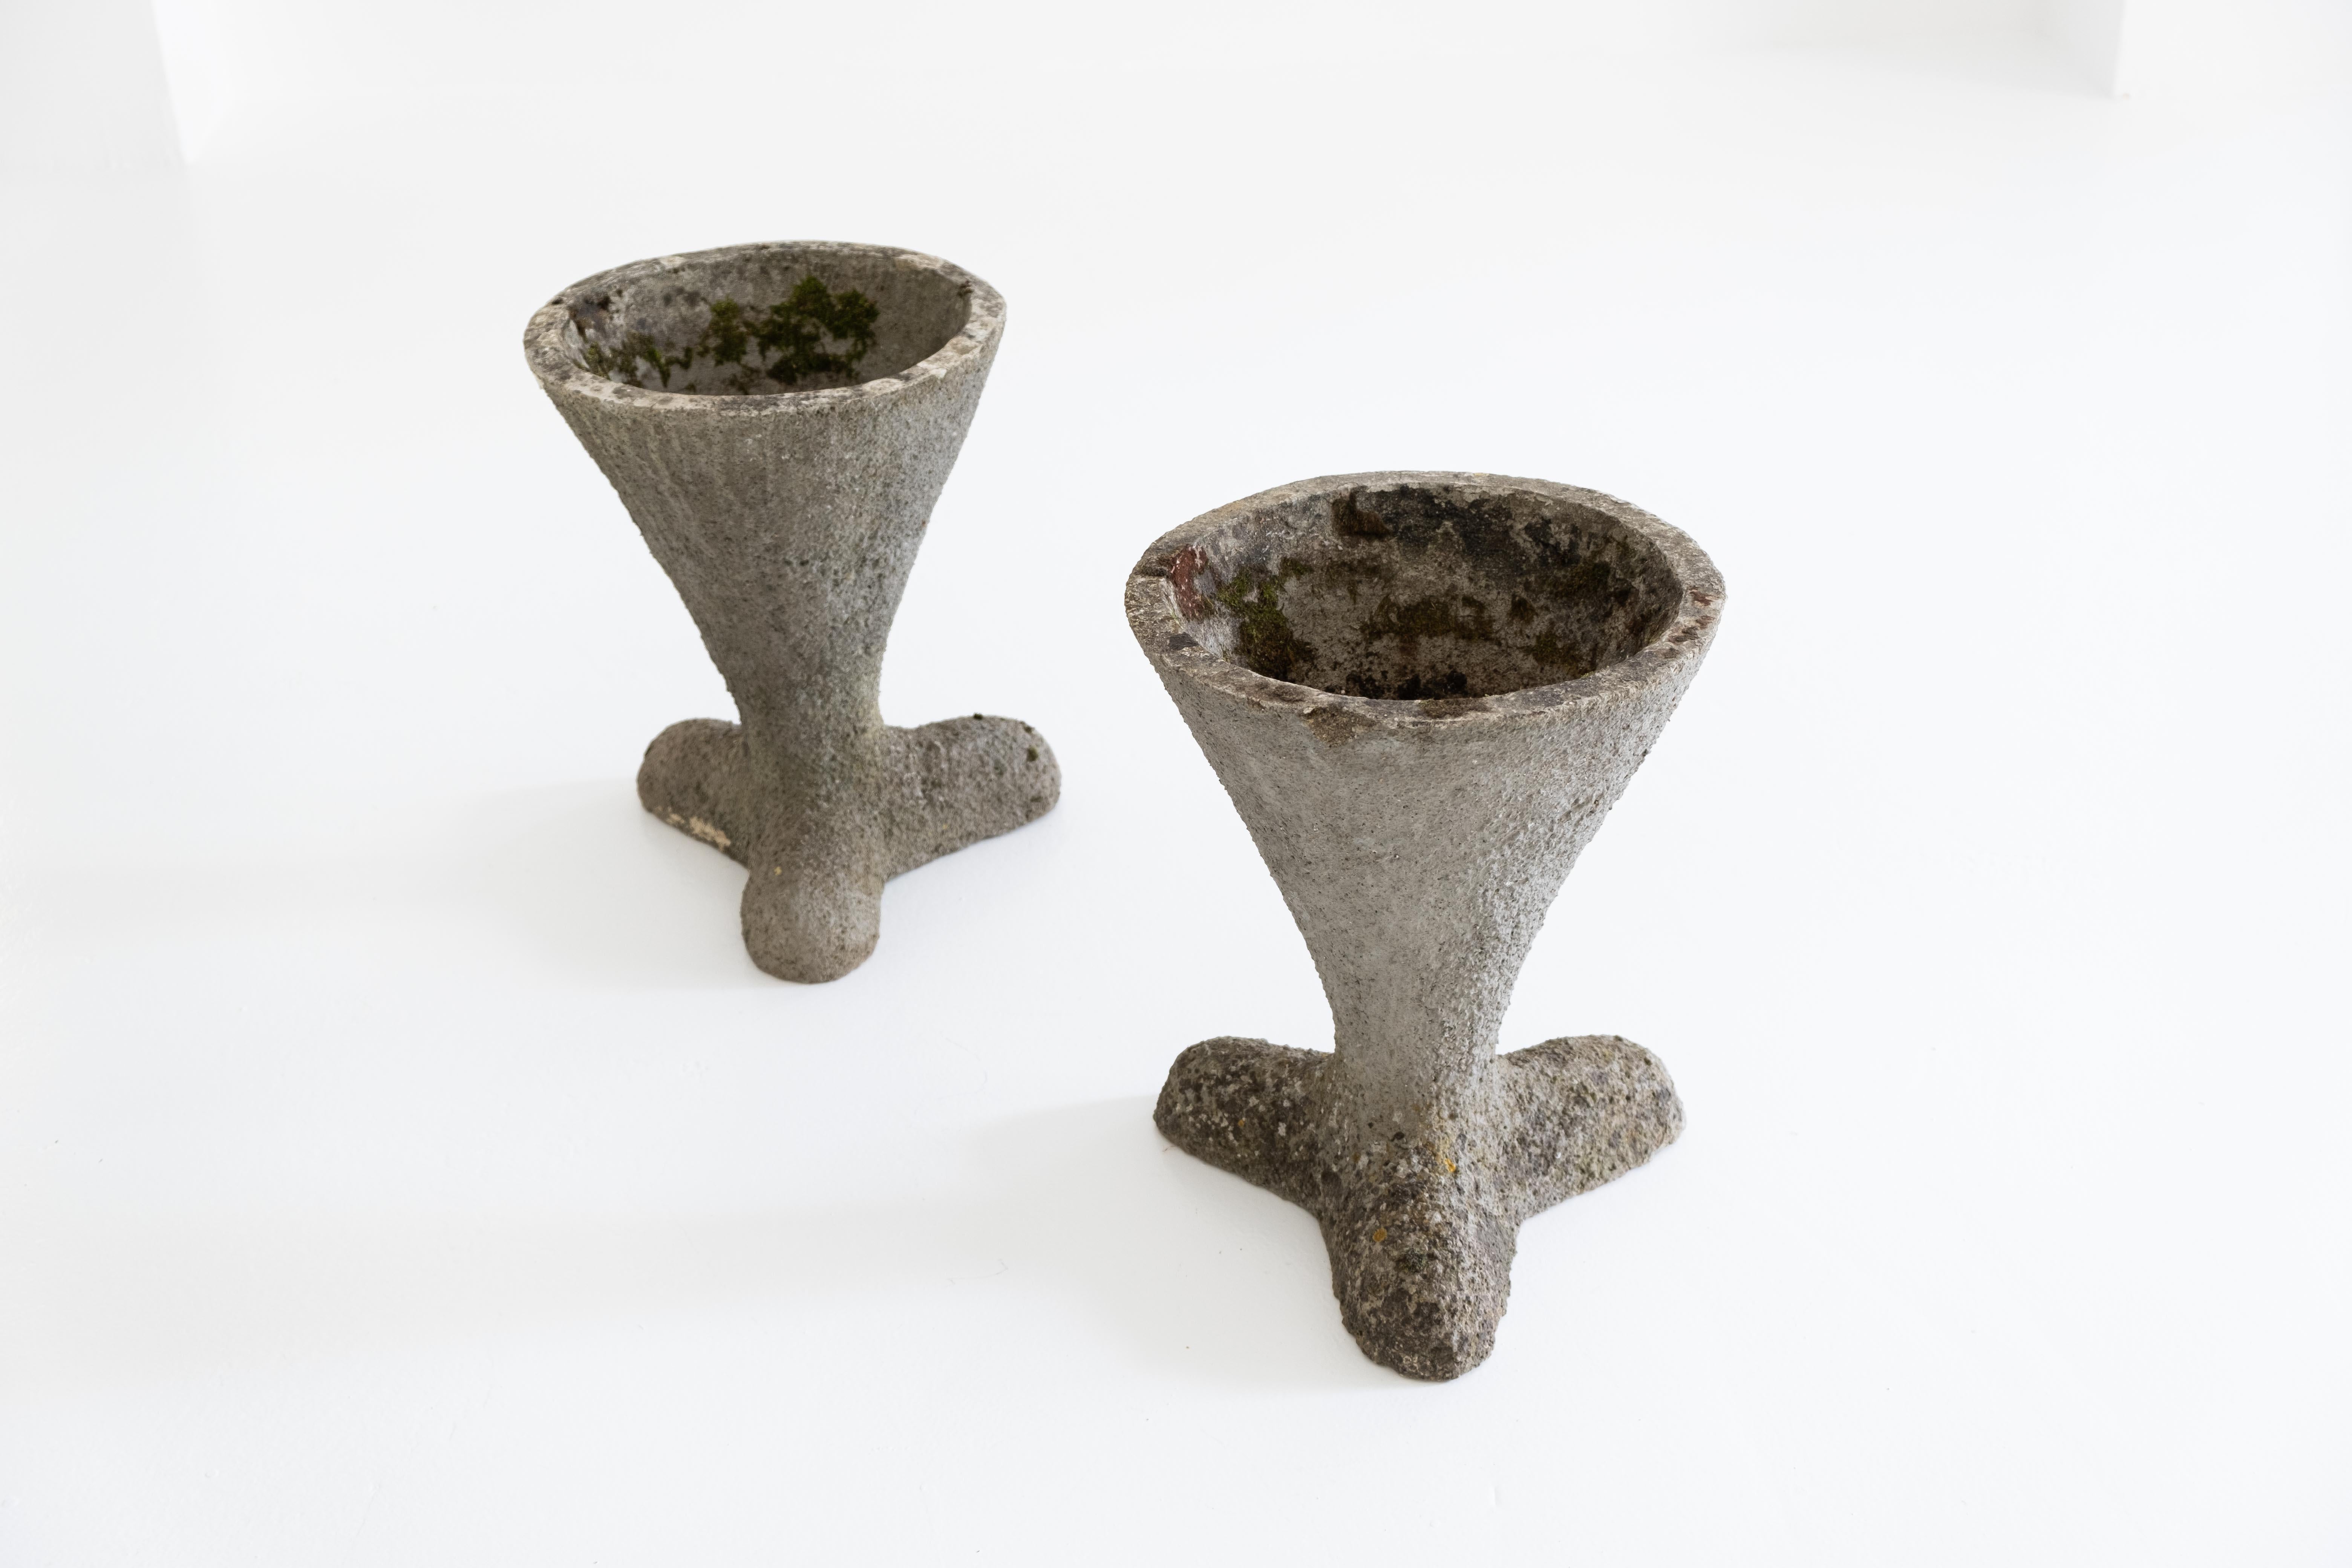 A small, sculptural and very decorative pair of concrete planters. The shape resembles an inverted cone supported by a chubby propeller foot. probably from the 1970s. Found it on the french atlantic coast, very good condition with wonderful